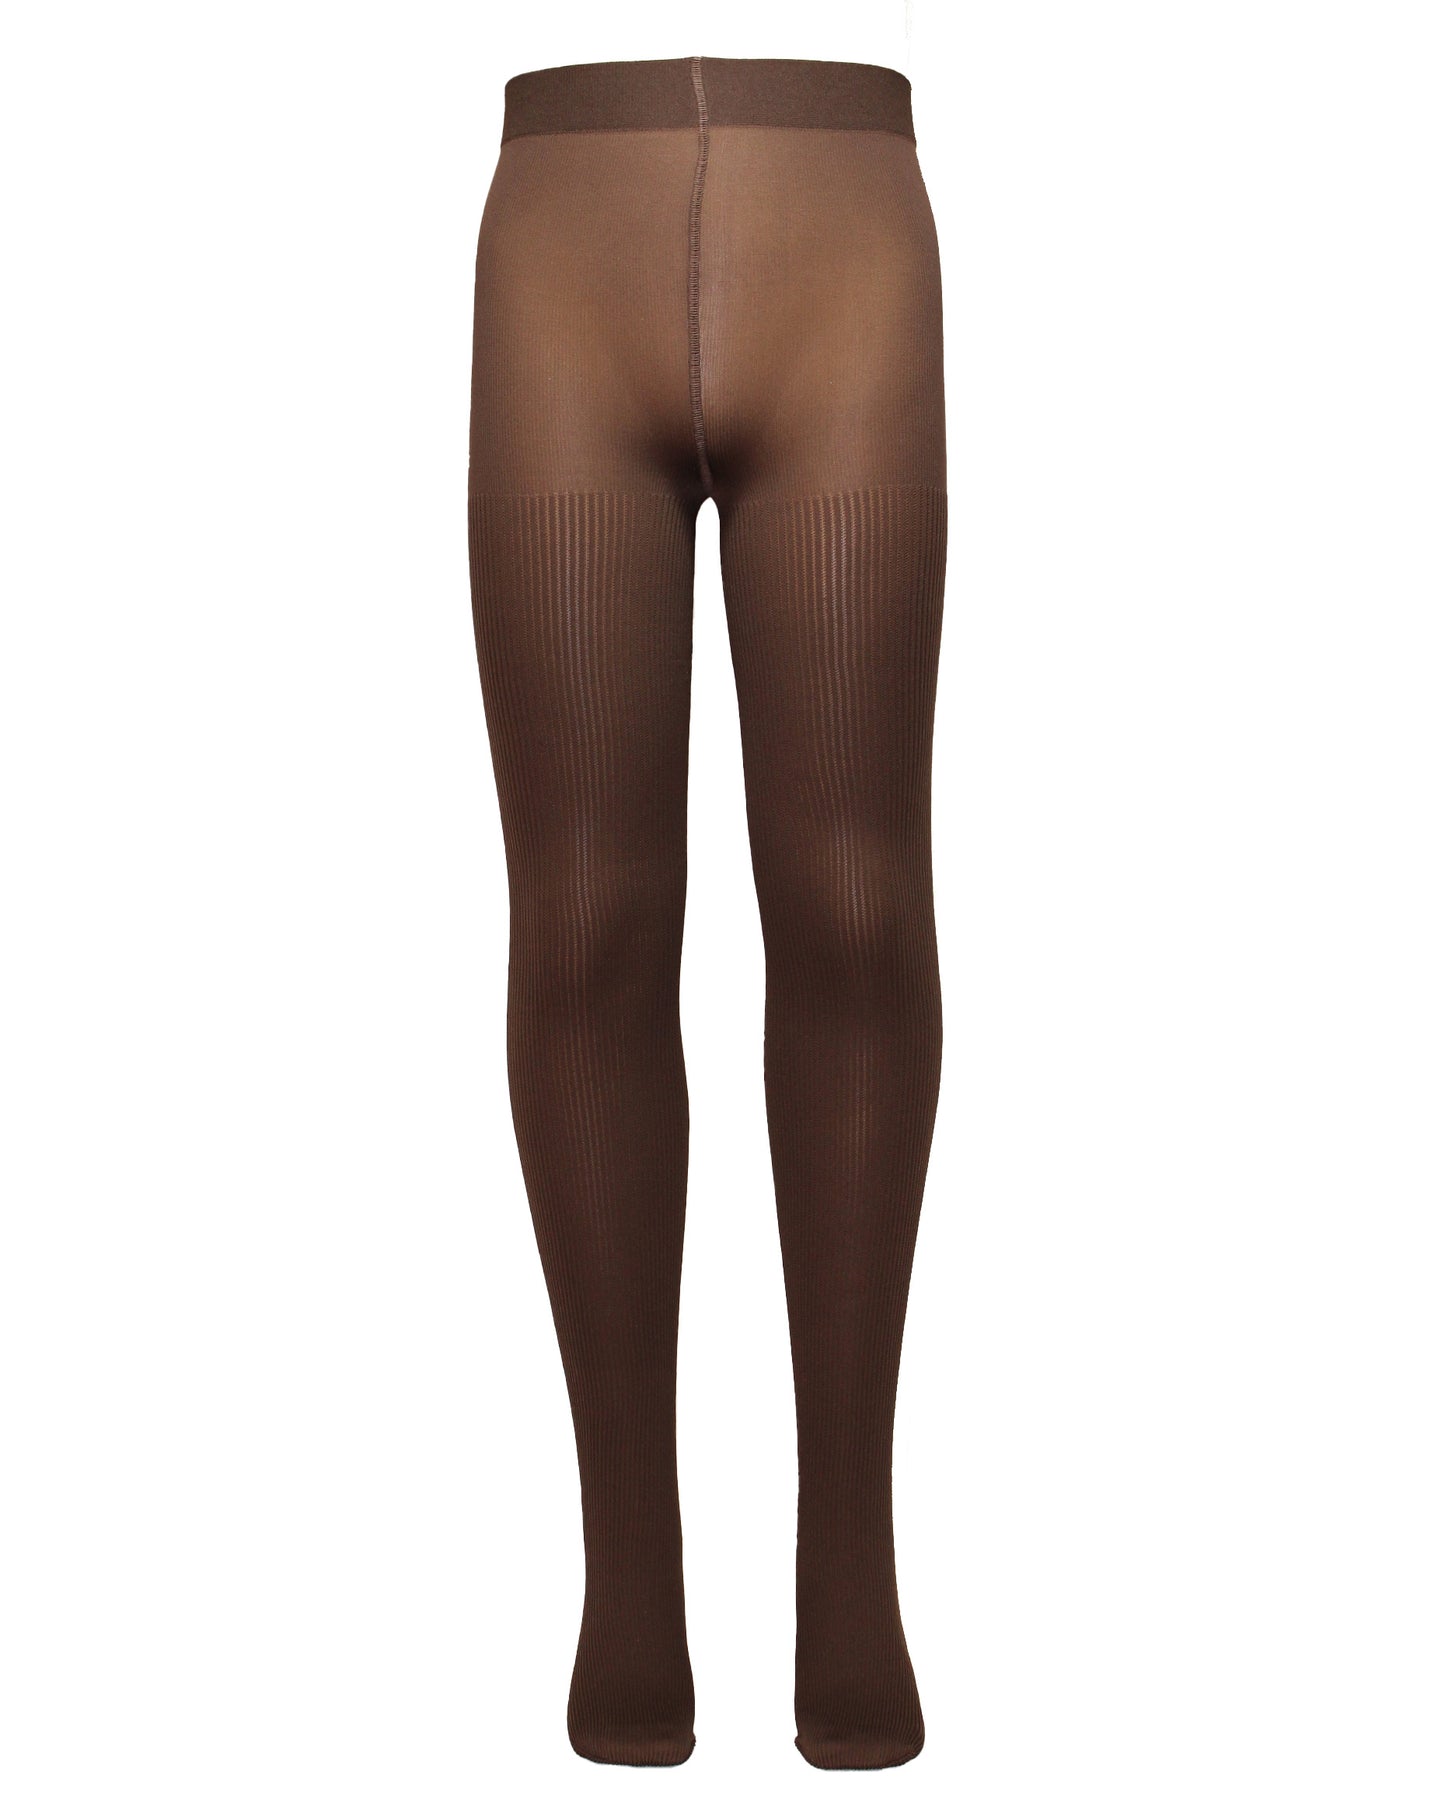 Omsa Serenella Cinderella Collant - Dark brown soft opaque ribbed children's tights with a plain smooth boxer top and deep comfort waist band.